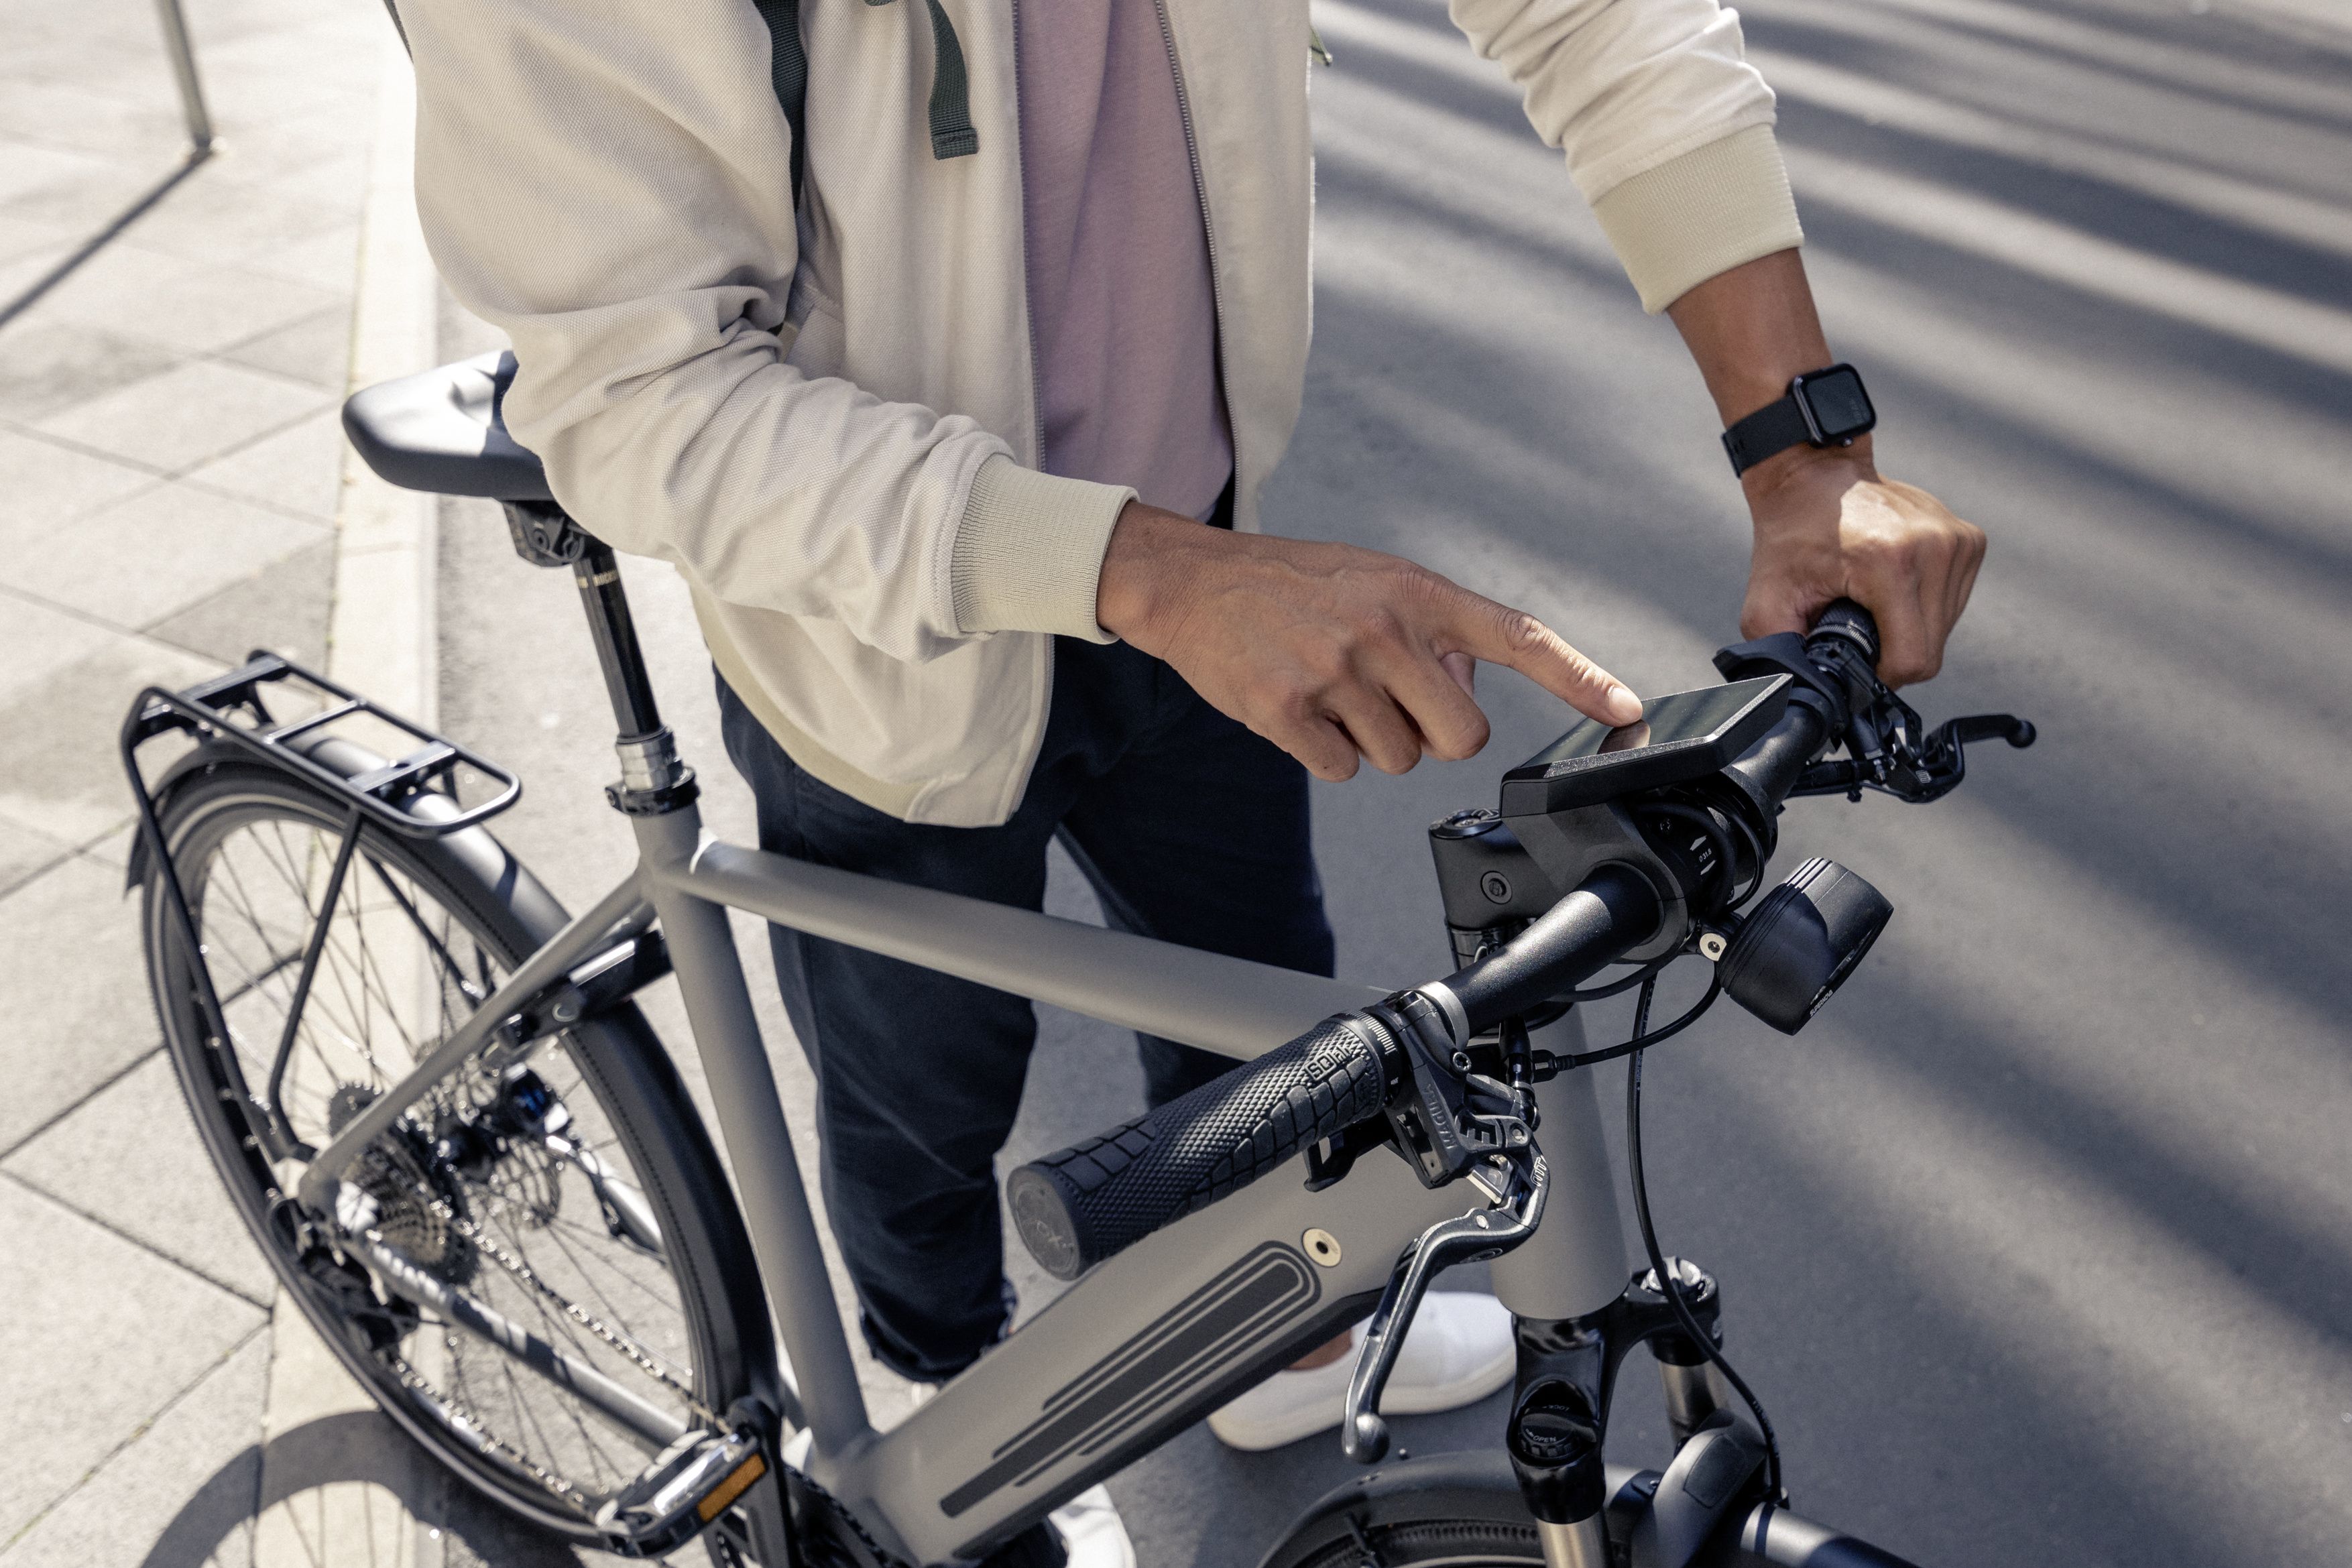 With the new updates for Nyon and eBike Connect, eBikers can now set and track their personal training goals. 